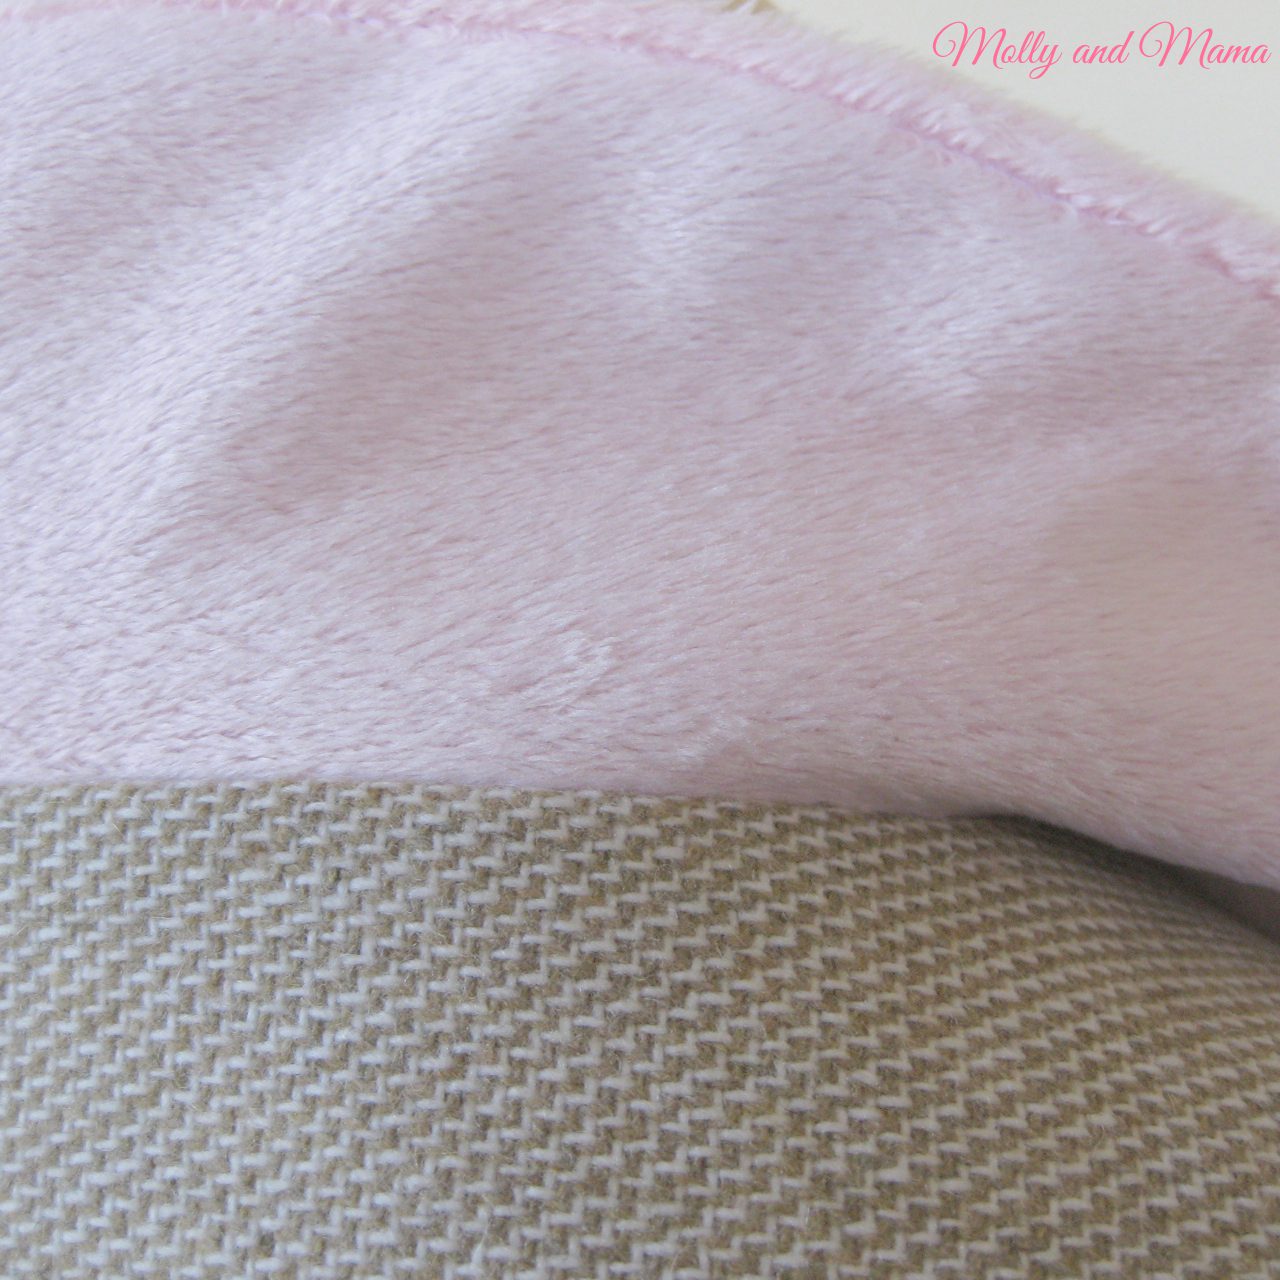 Lining detail on the capelet - pink knit 'minky' and wool suiting